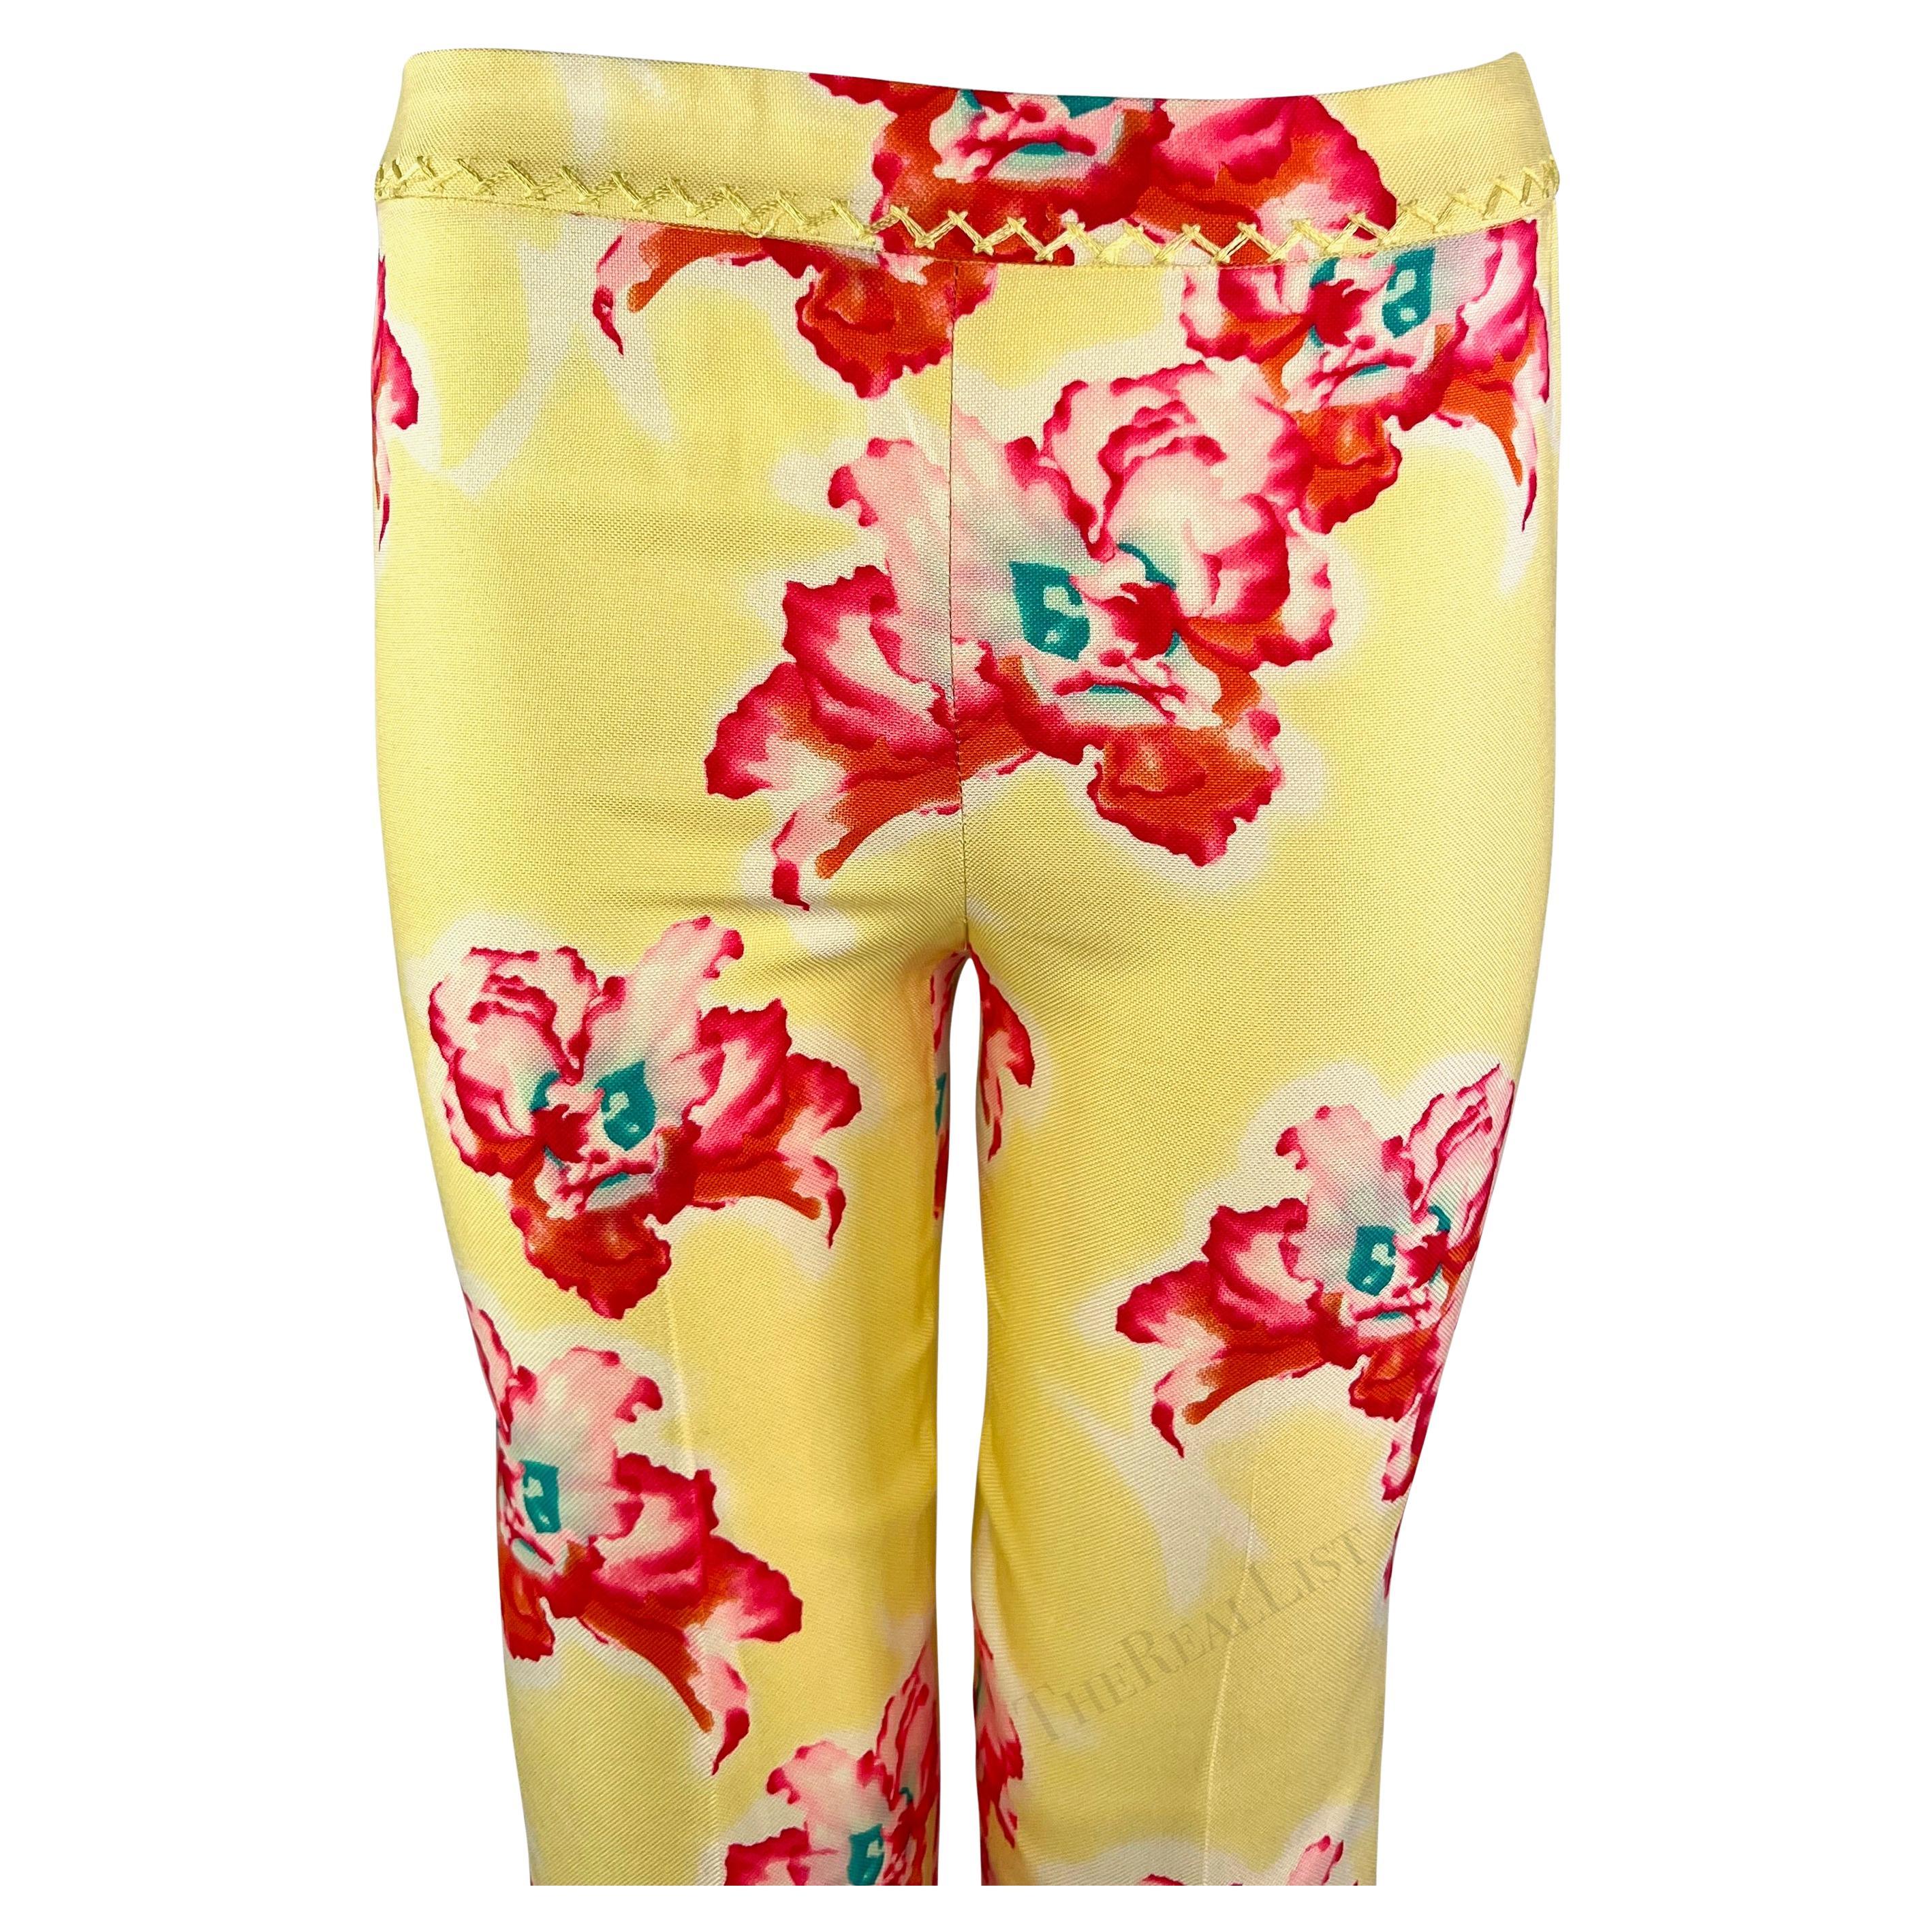 S/S 1999 Gianni Versace by Donatella Pink Yellow Orchid Print Silk Cropped Pants In Excellent Condition For Sale In West Hollywood, CA